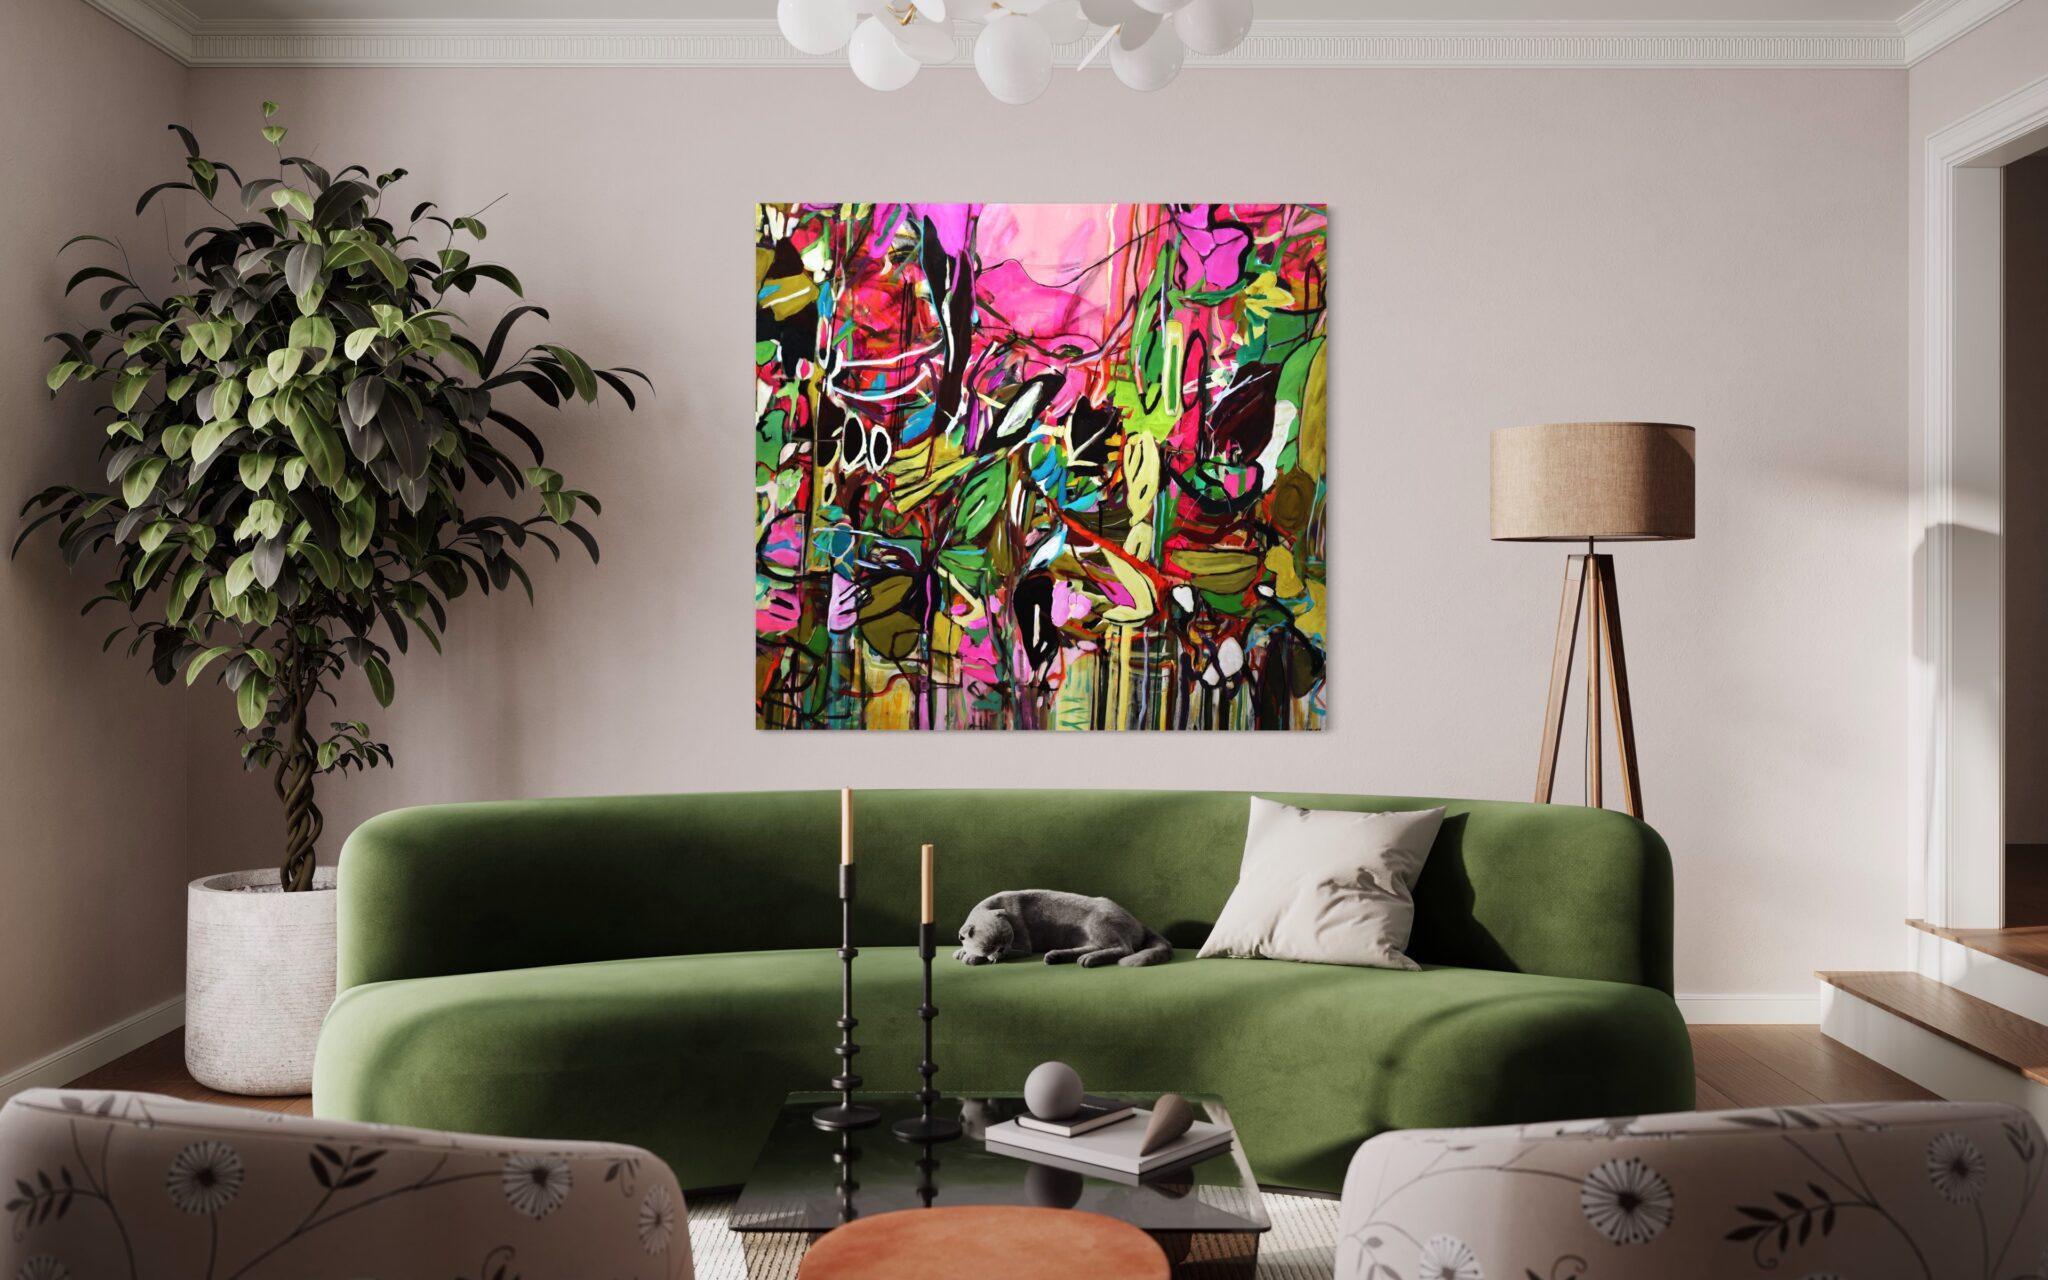 Within this vibrant abstraction, artist Christy Hopkins beckons the viewer into an exclusive realm defined by a rich interplay of color, intricate layers, and emotive resonance unique to her perspective. Comprising contrasting swaths of vivid